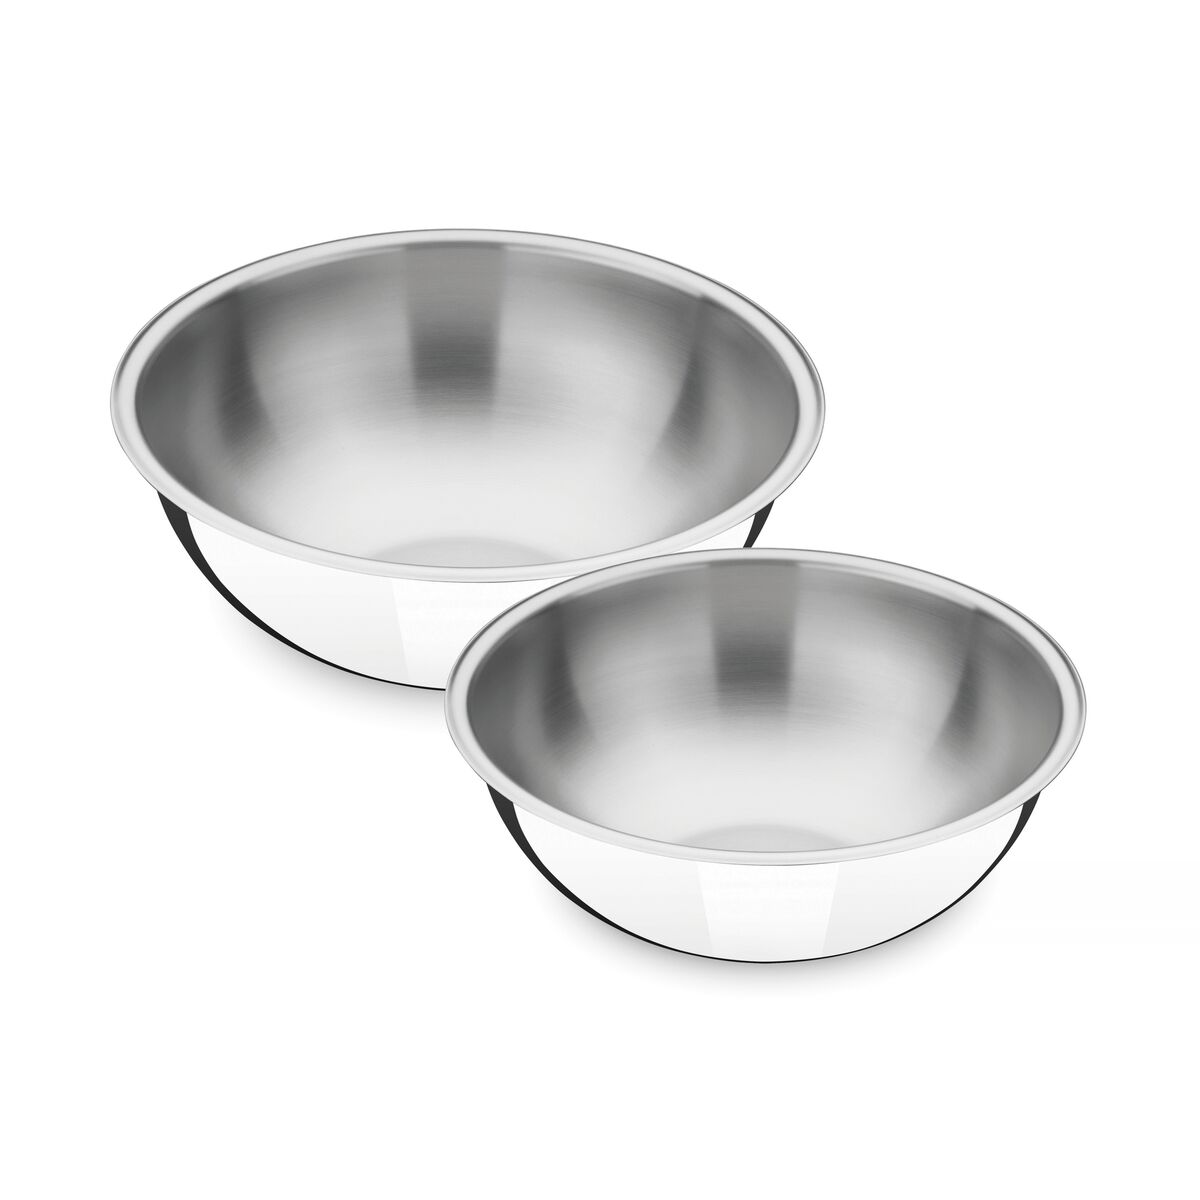 Tramontina Cucina stainless steel container set, 2 pc set